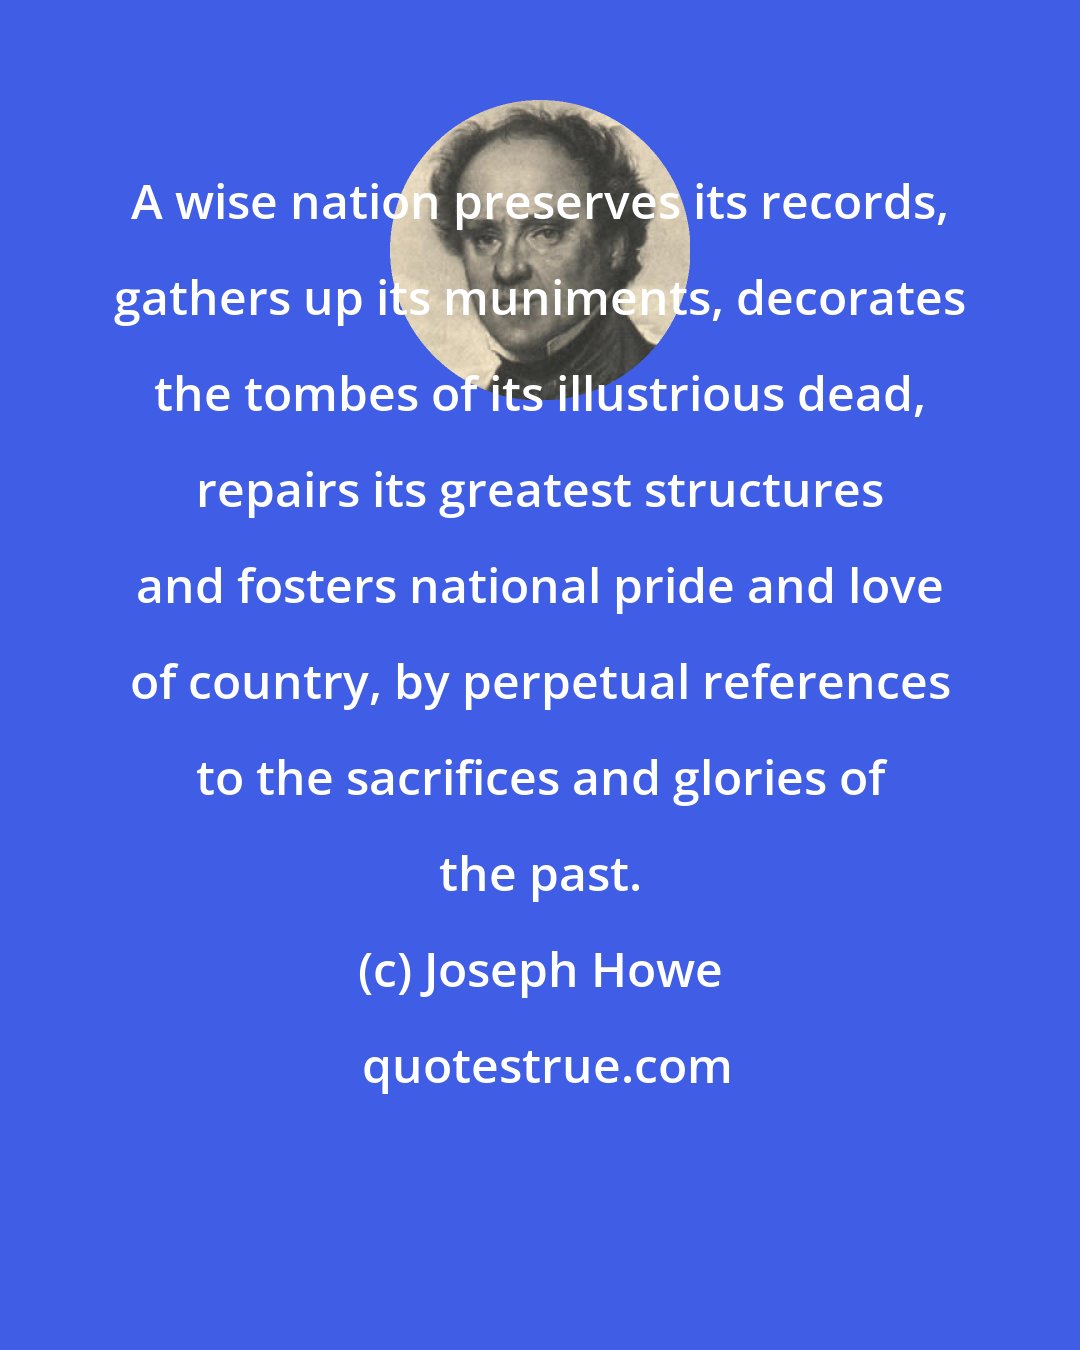 Joseph Howe: A wise nation preserves its records, gathers up its muniments, decorates the tombes of its illustrious dead, repairs its greatest structures and fosters national pride and love of country, by perpetual references to the sacrifices and glories of the past.